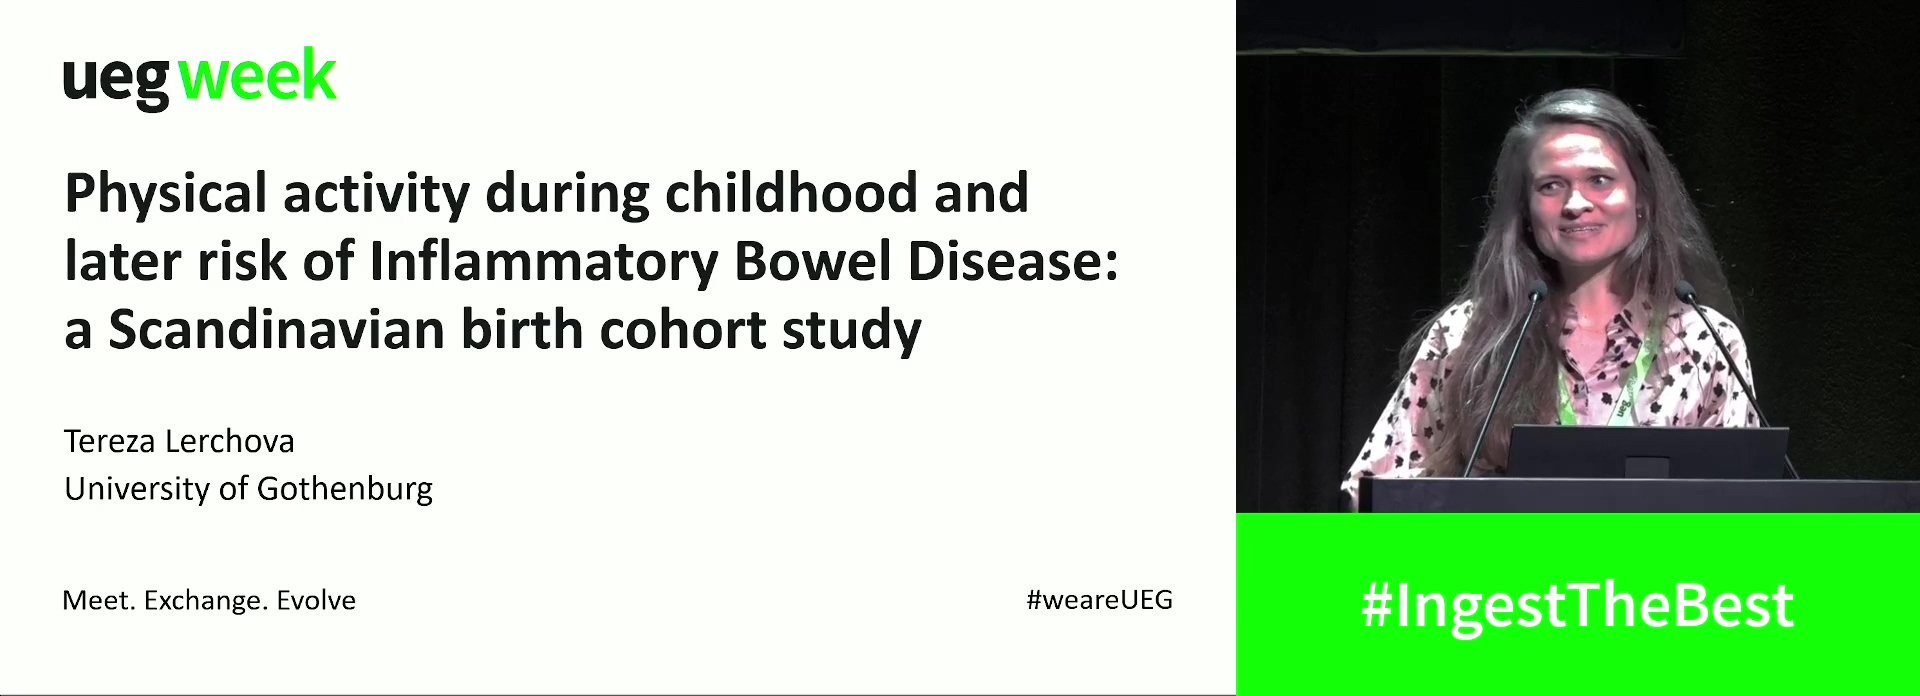 PHYSICAL ACTIVITY IN EARLY CHILDHOOD IS NOT ASSOCIATED WITH LATER INFLAMMATORY BOWEL DISEASE: PRELIMINARY RESULTS FROM A SCANDINAVIAN BIRTH COHORT STUDY